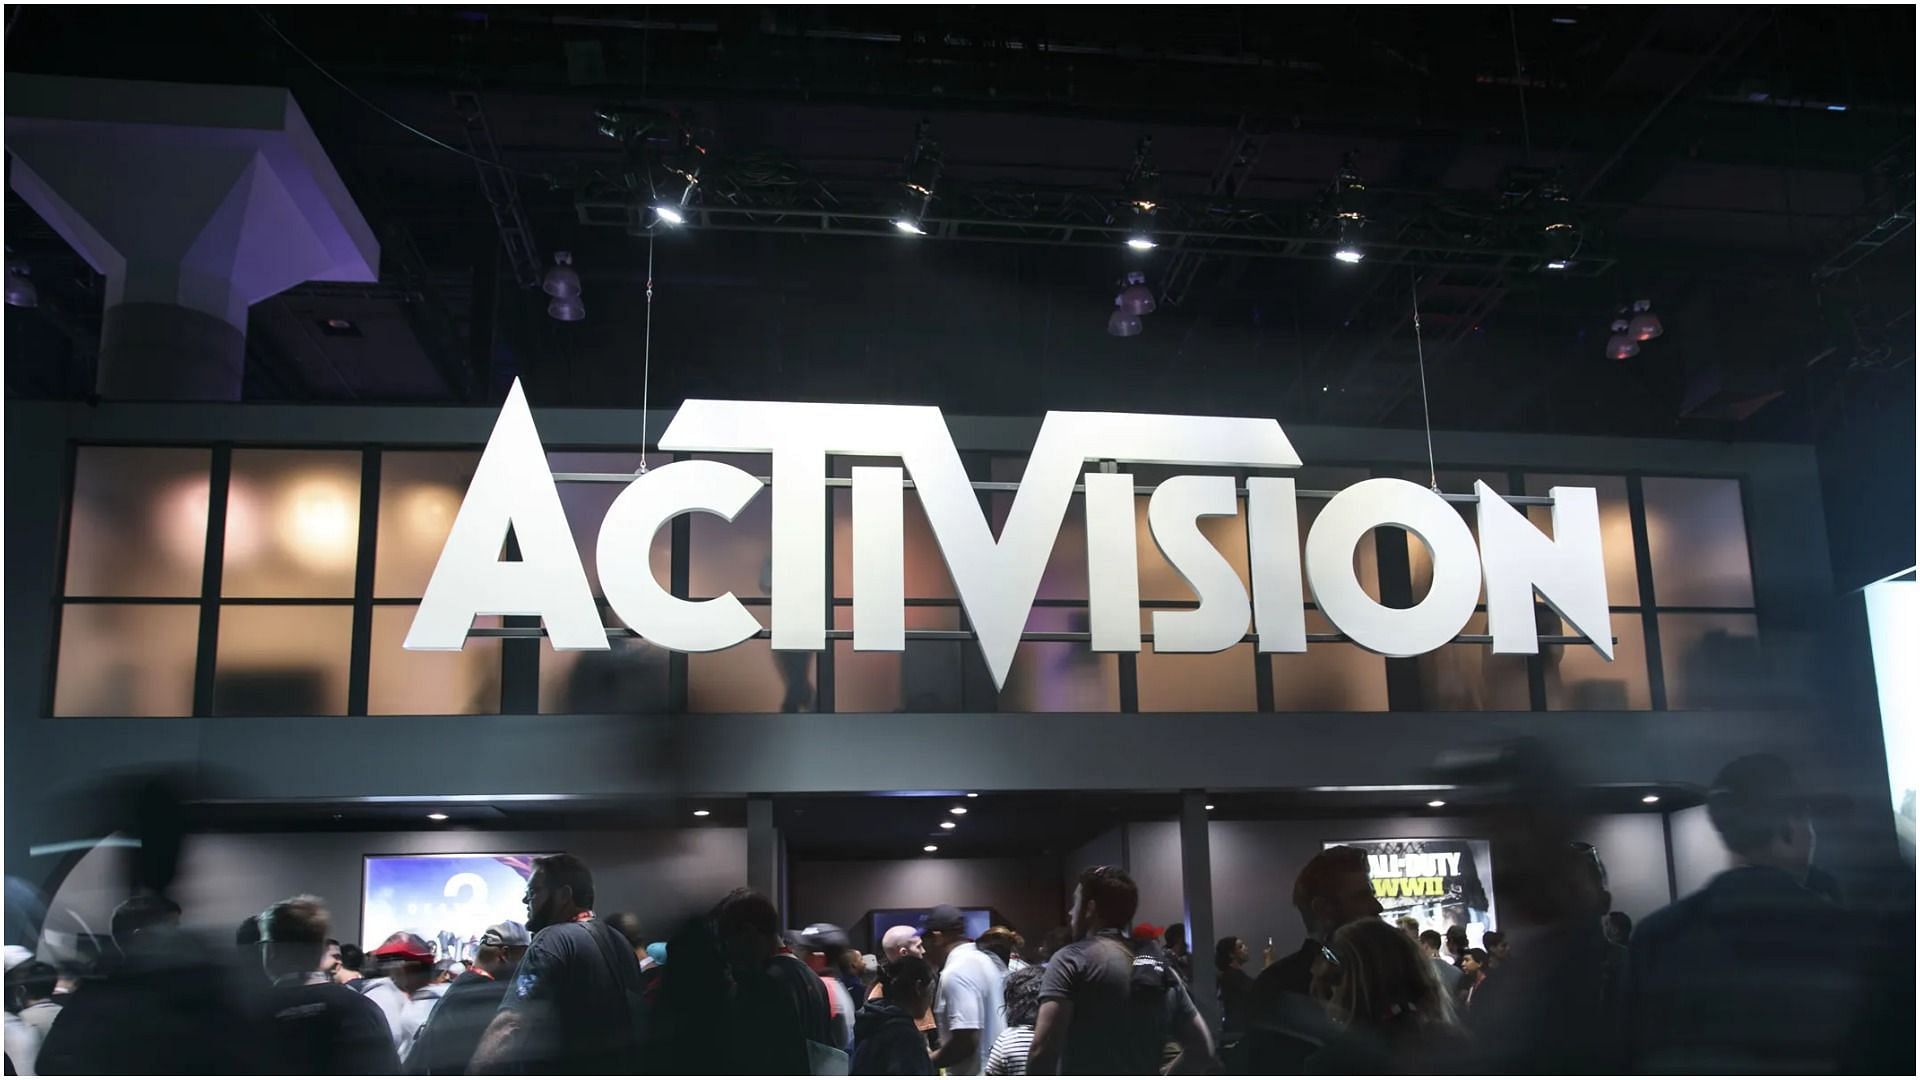 Activision Blizzard shareholders have been asked not to go ahead with the Xbox deal (Image via Activision)